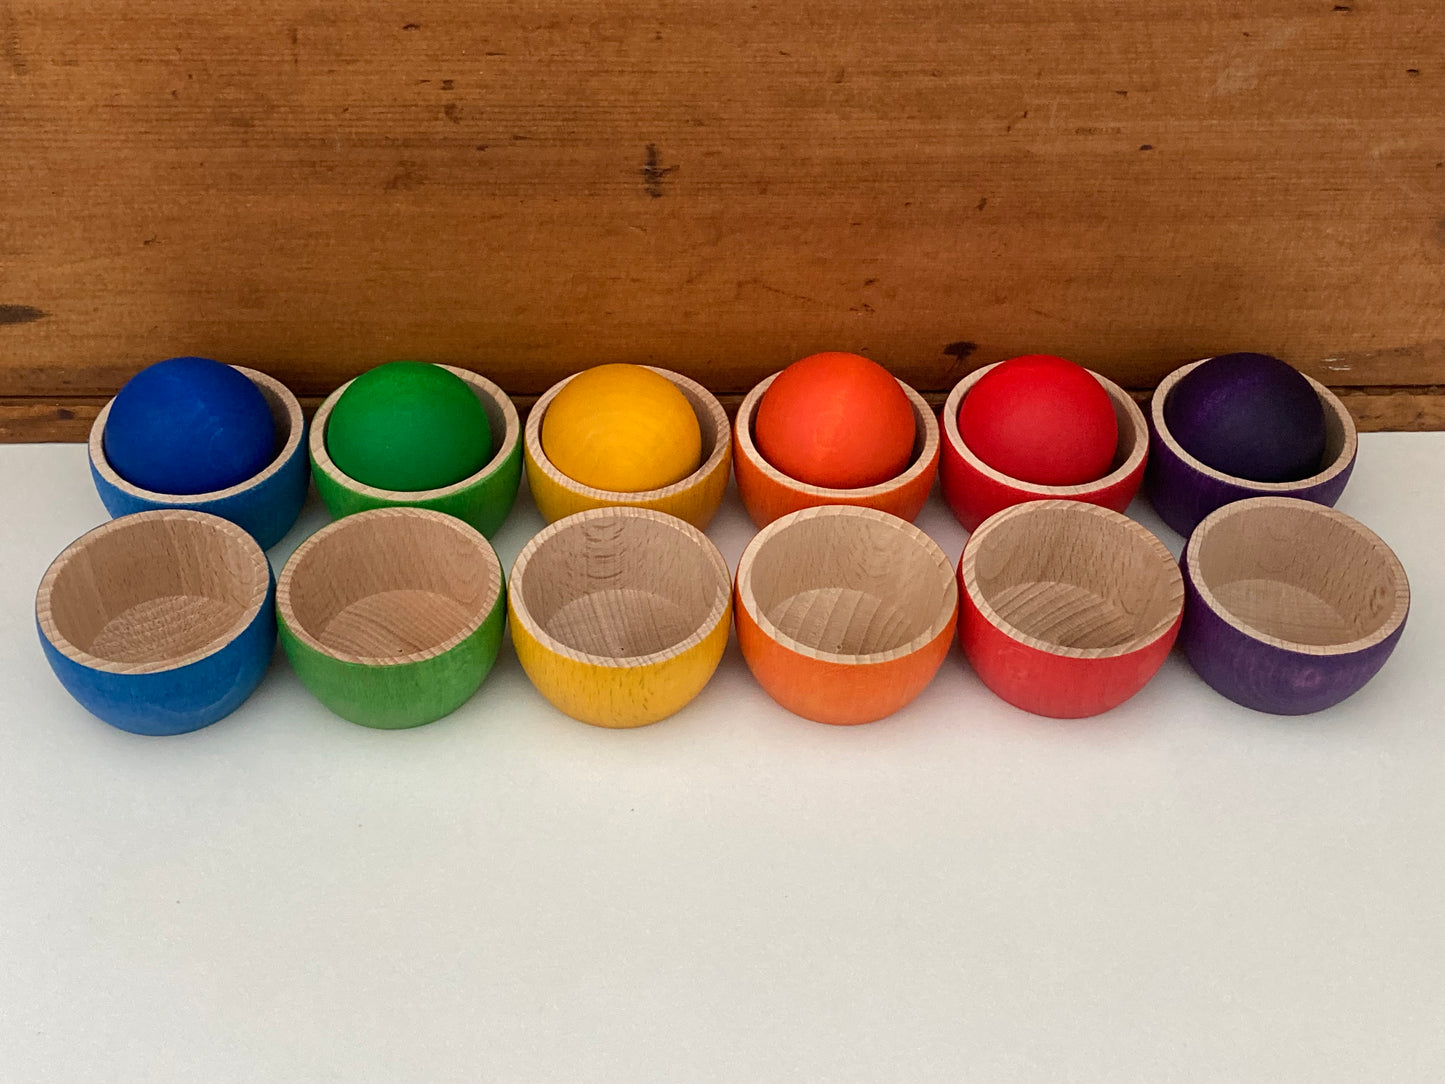 Wooden Toy - Rainbow BOWLS AND BALLS by Grapat, 18 pieces!